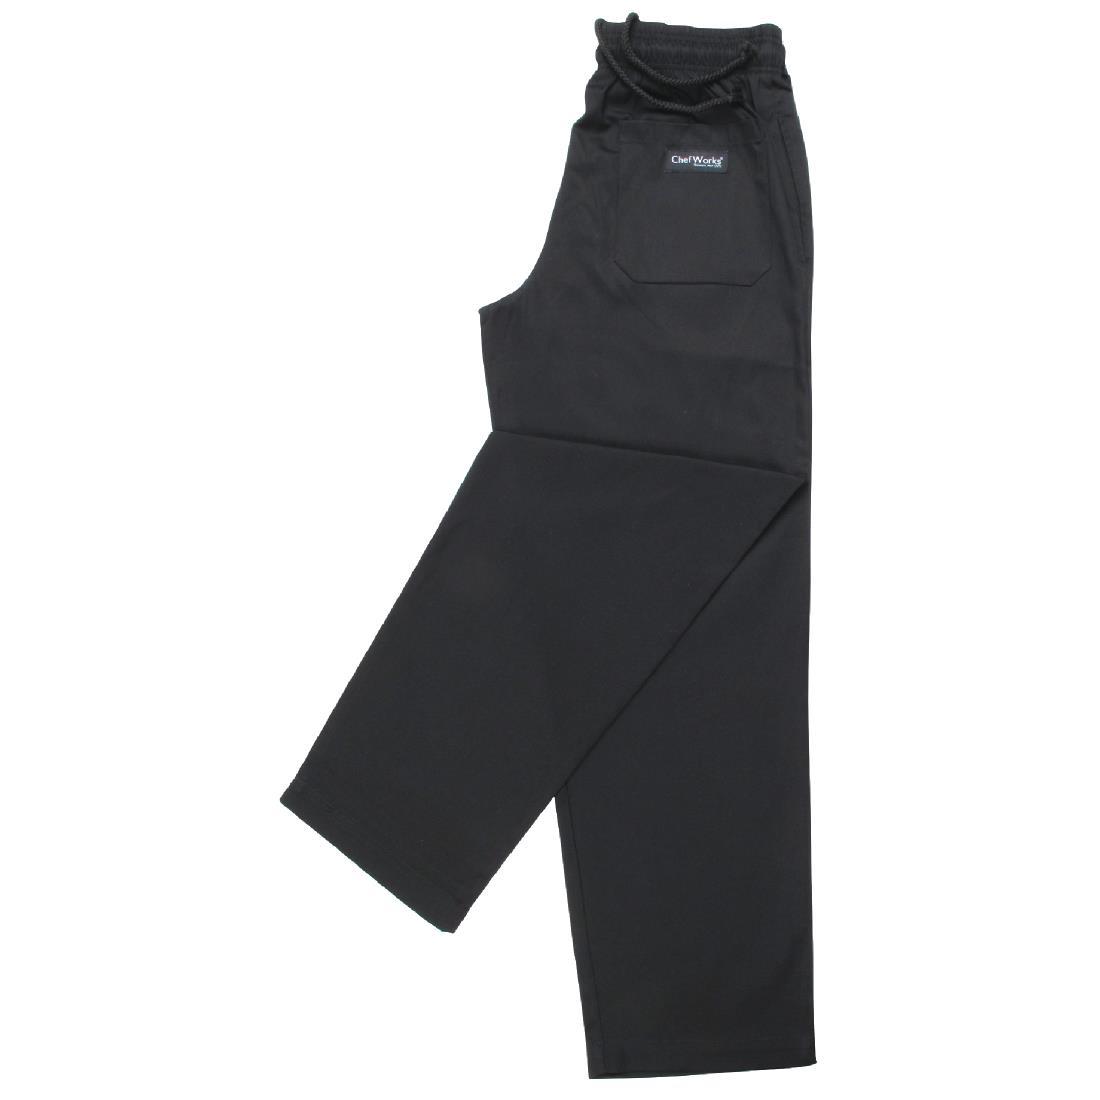 Chef Works Essential Baggy Trousers Black 6XL - A029-6XL  - 2